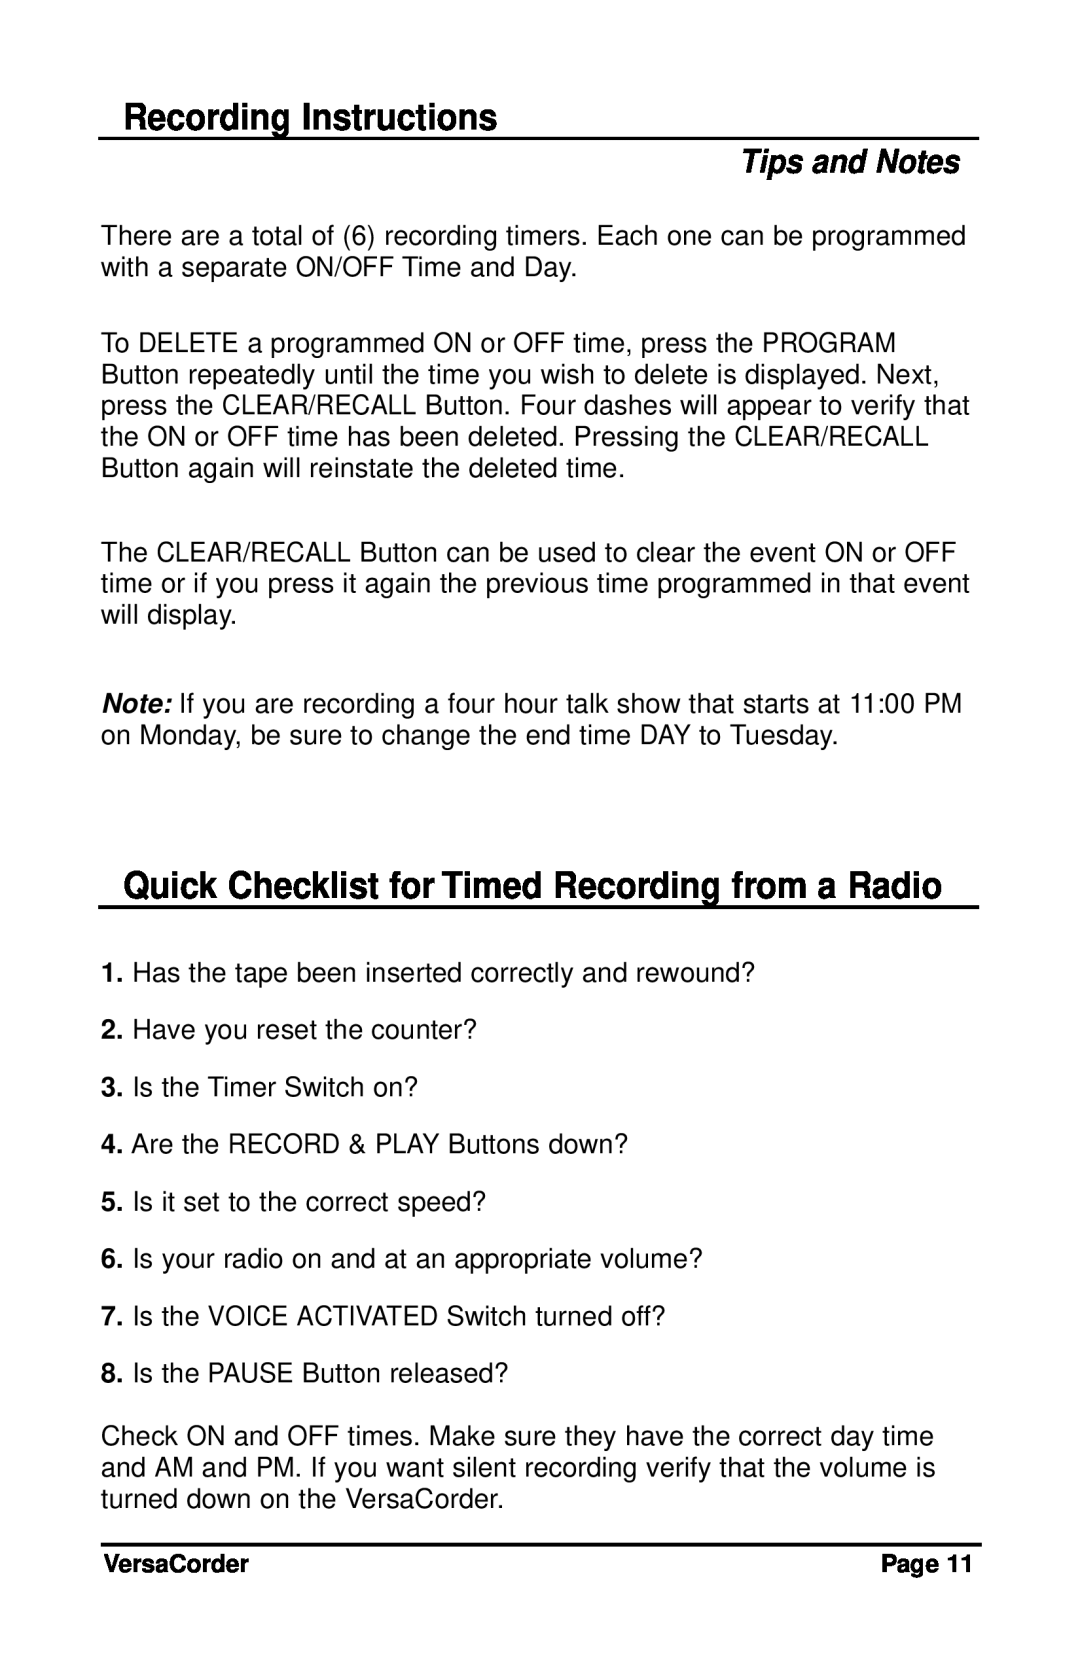 C. Crane VersaCorder Dual Speed Recorder Quick Checklist for Timed Recording from a Radio, Tips and Notes 